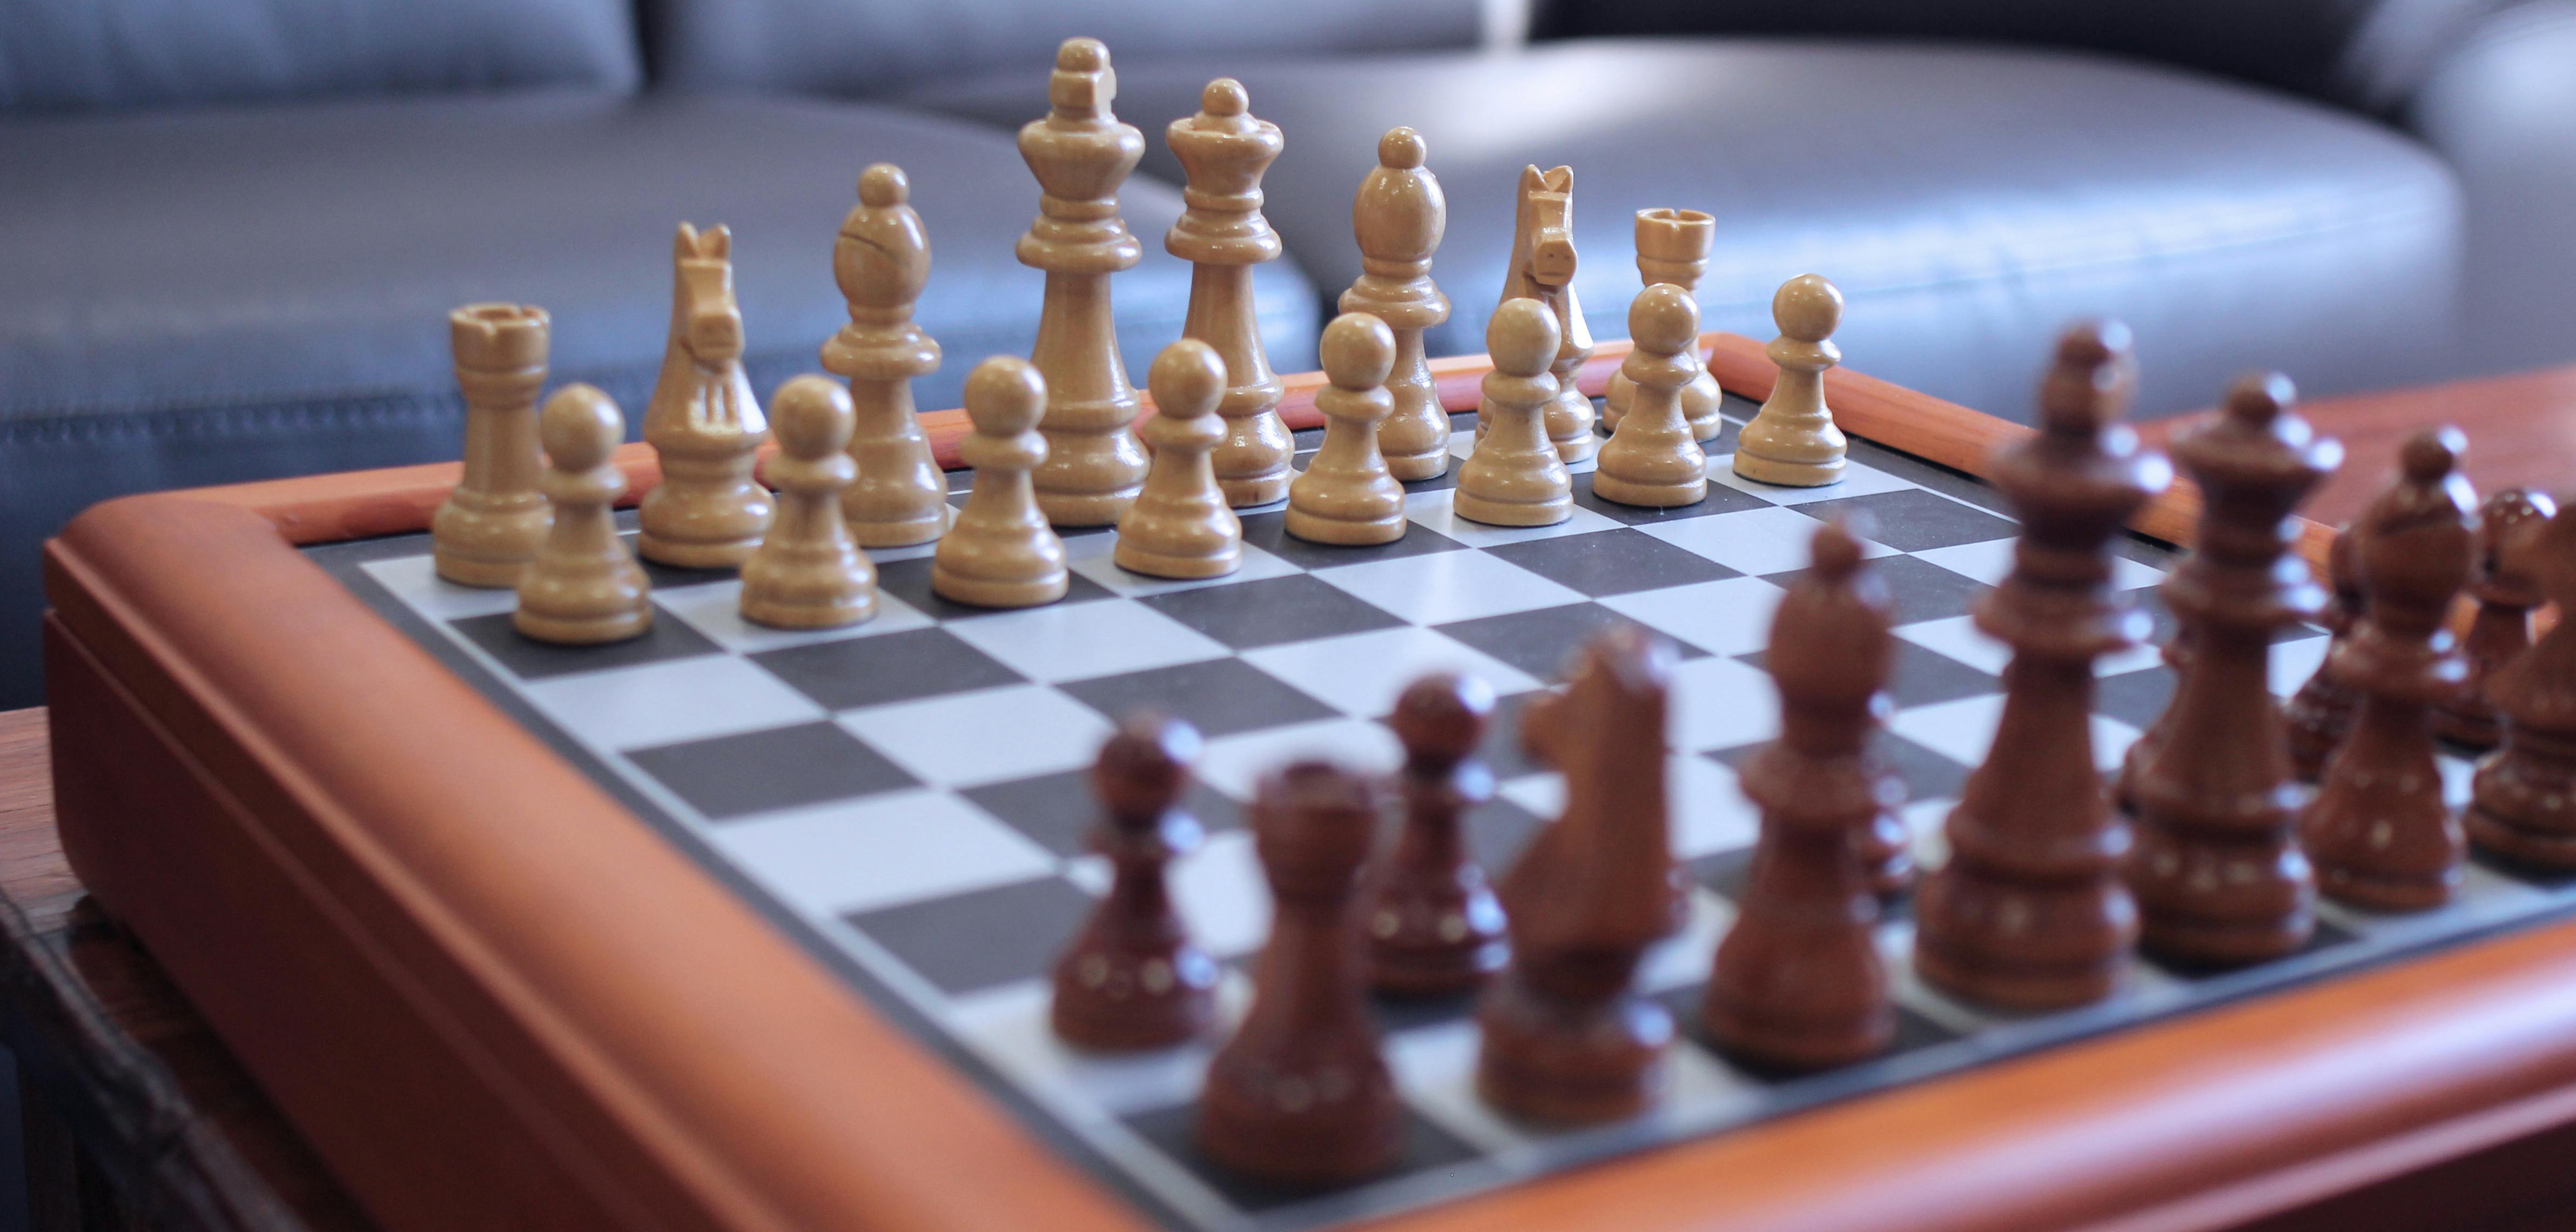 Checkmate Photos, Download The BEST Free Checkmate Stock Photos & HD Images